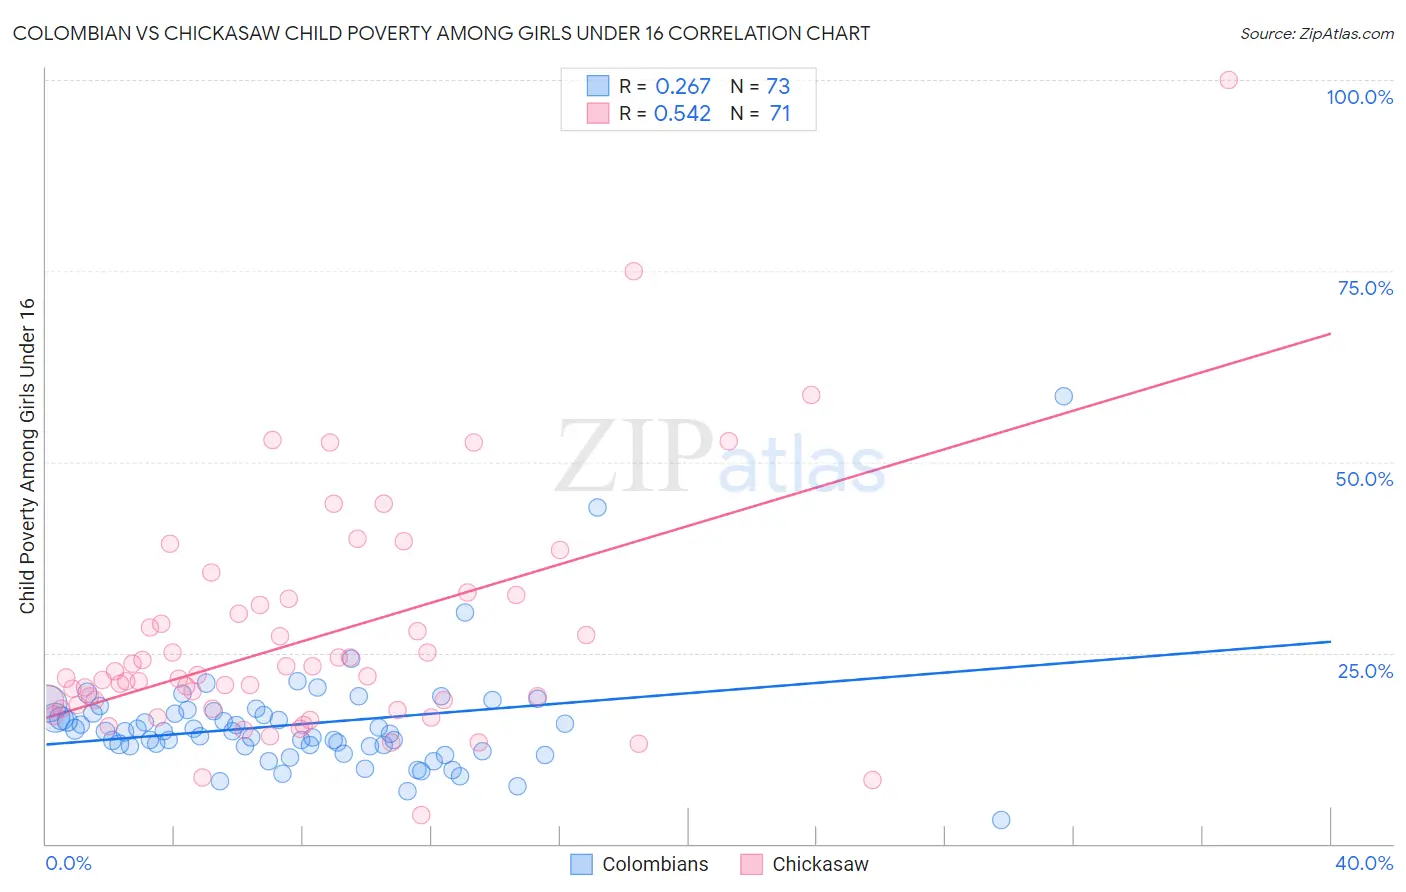 Colombian vs Chickasaw Child Poverty Among Girls Under 16